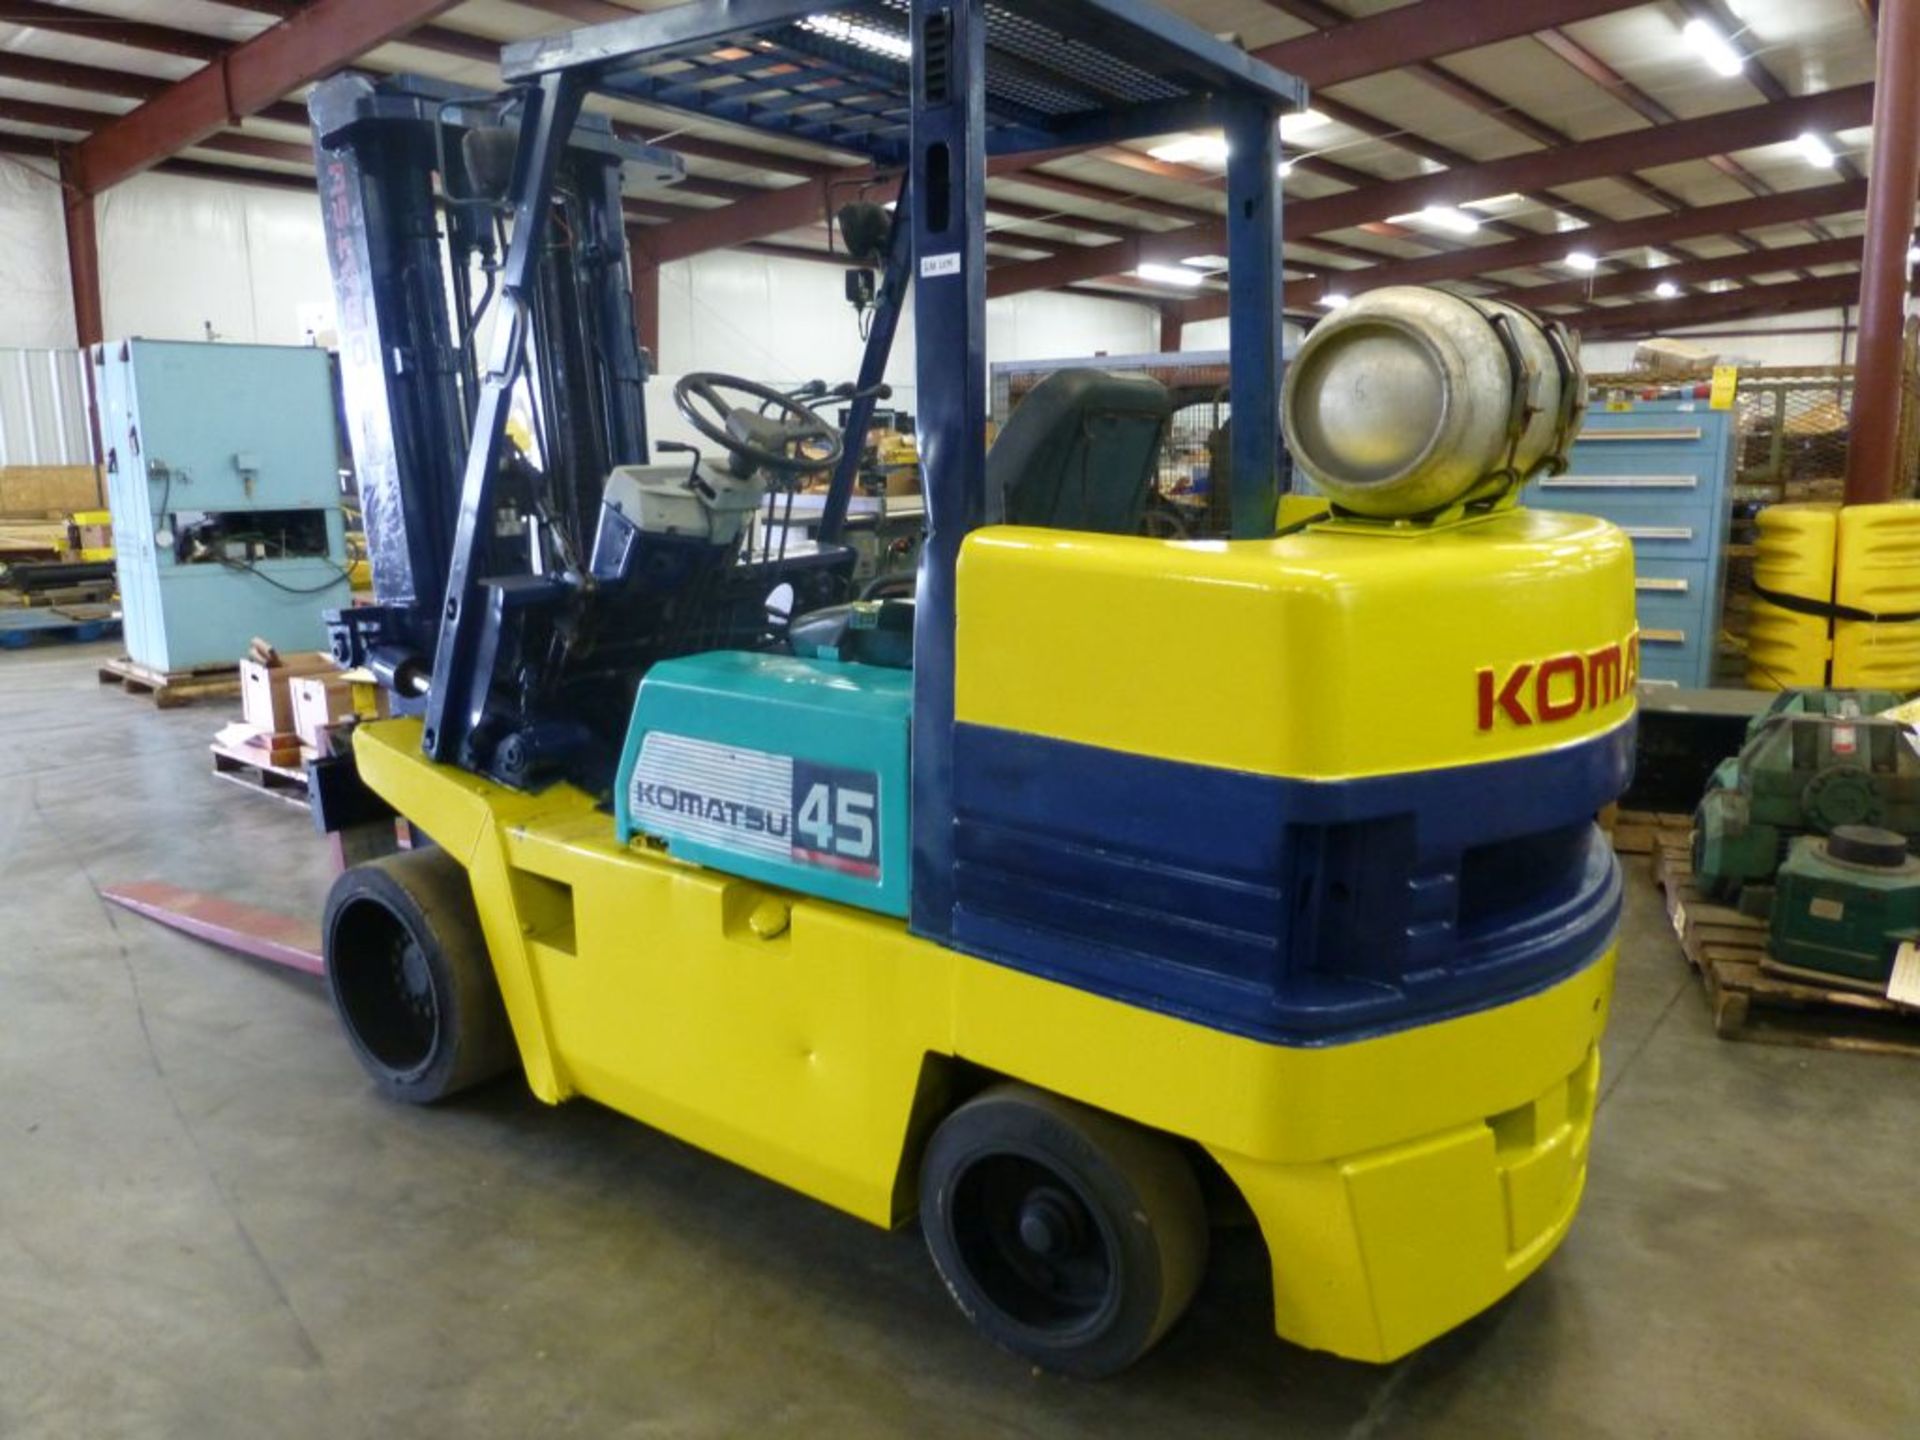 Komatsu Solid Tire Propane Forklift; Capacity: 8,830 lbs; Max Lift Height: 185":Model No. FG-45ST-6; - Image 7 of 19